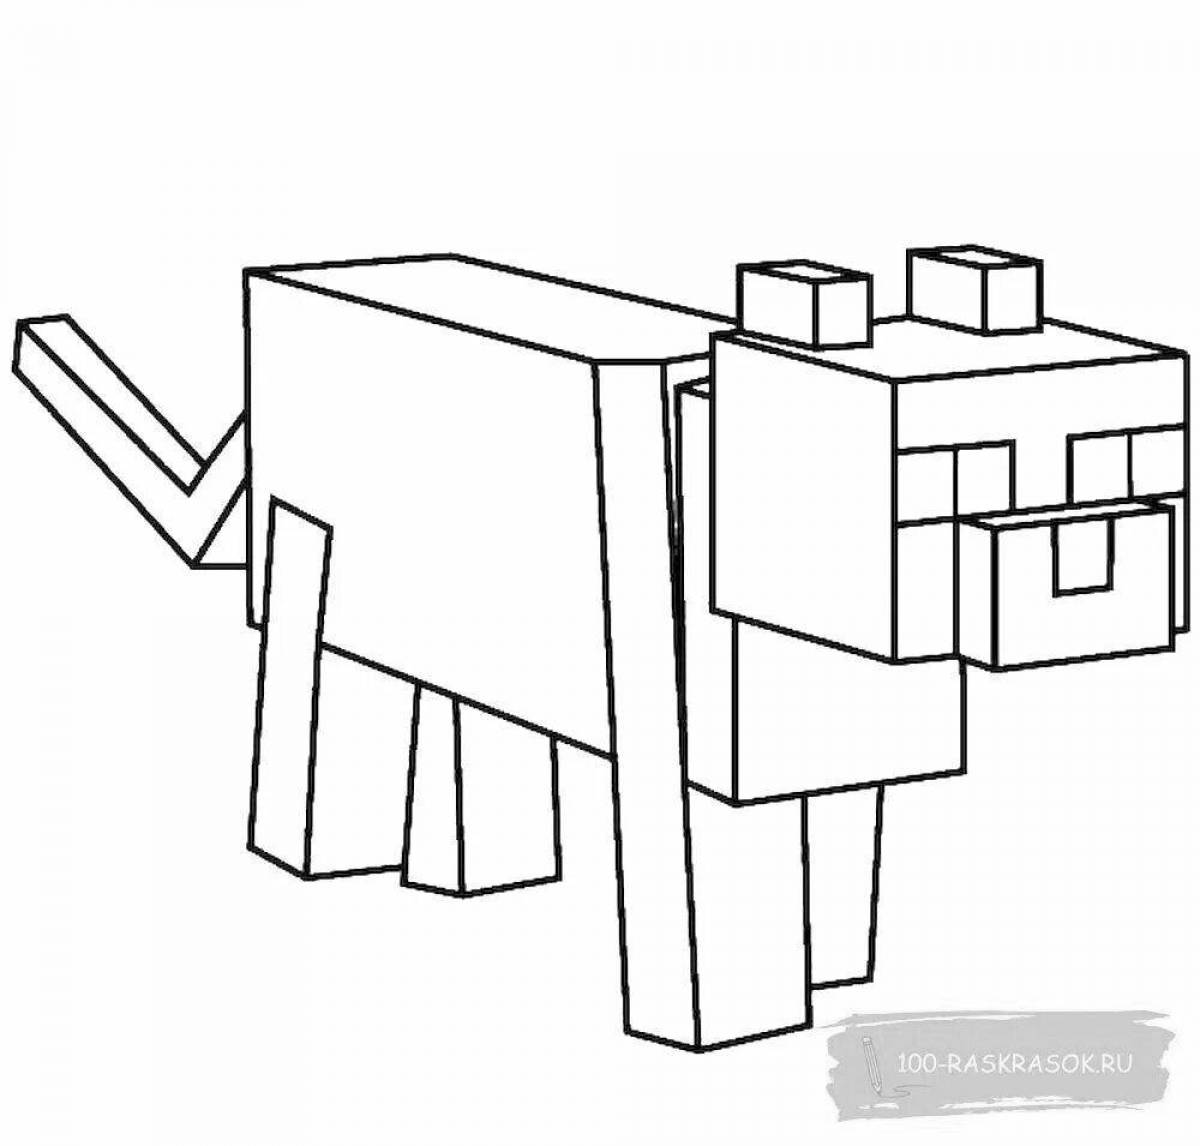 Intriguing minecraft compote novel coloring page